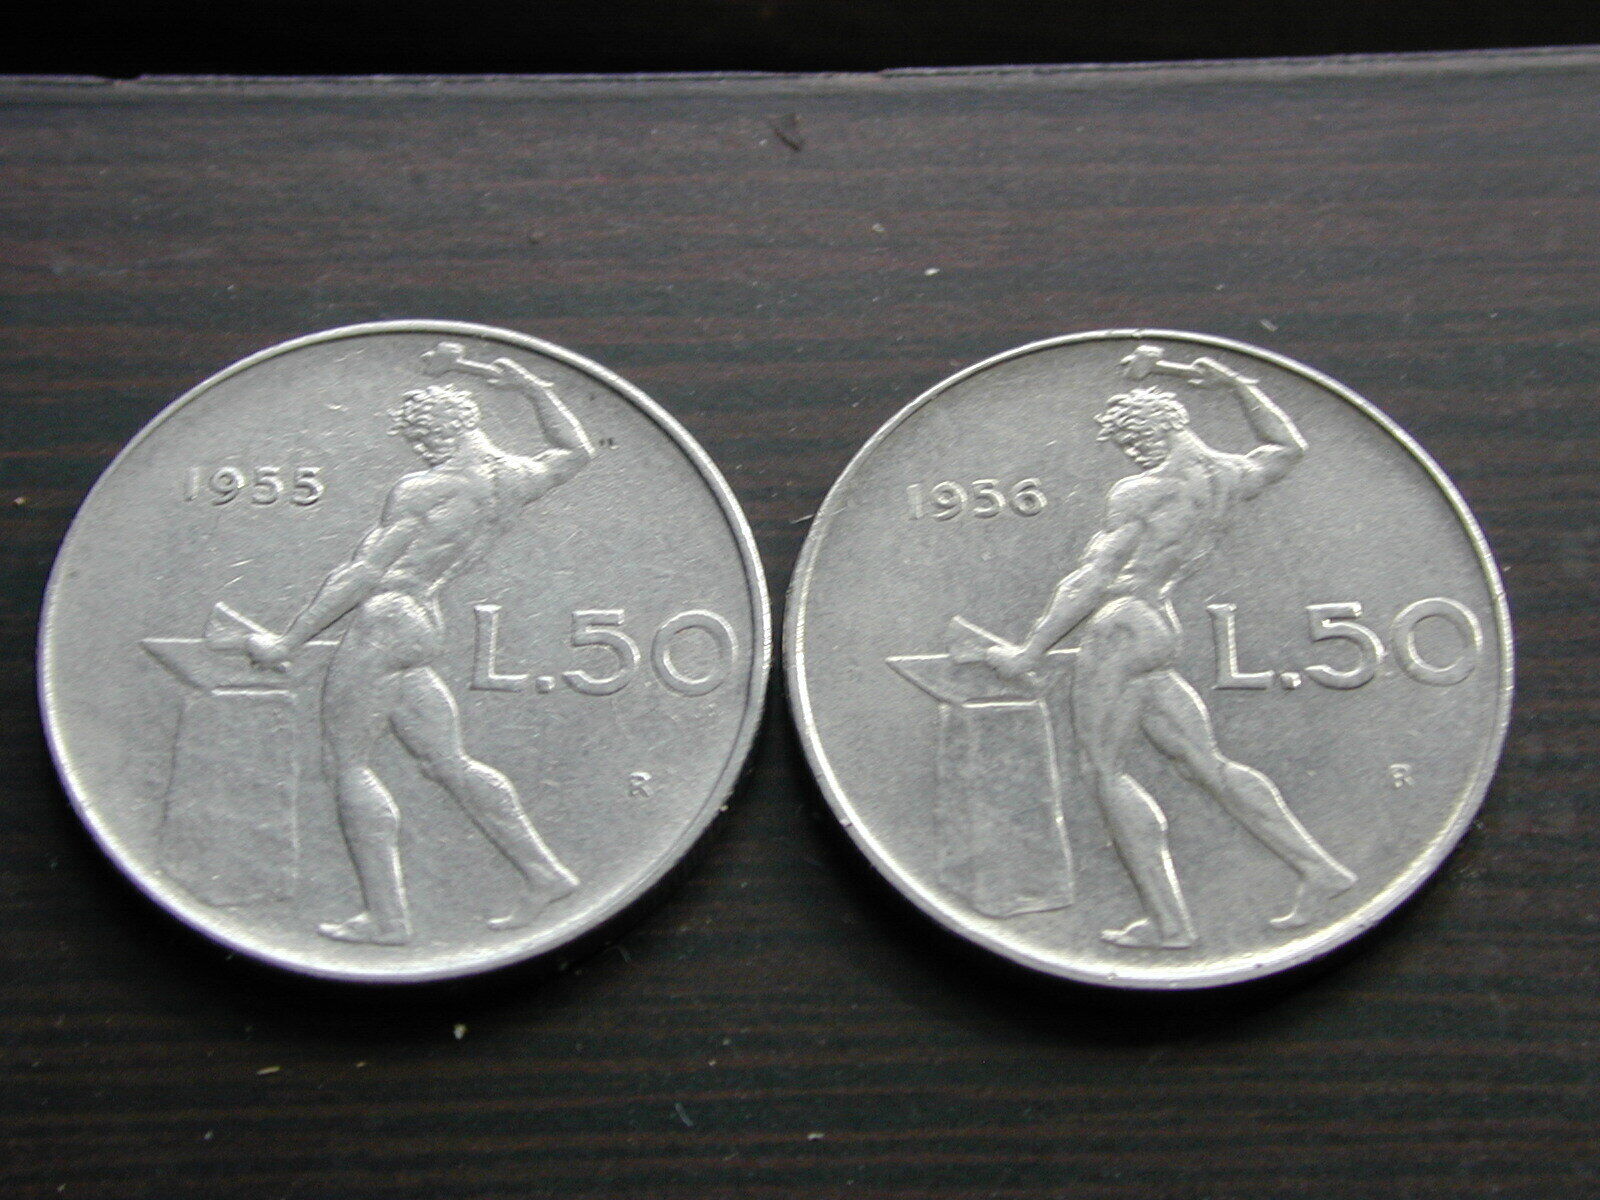 ITALY 19 pc Stainless Steel 50 lire 1955-78 KM95 16 pcs and 1 93 KM95a Nice Lot Без бренда - фотография #2